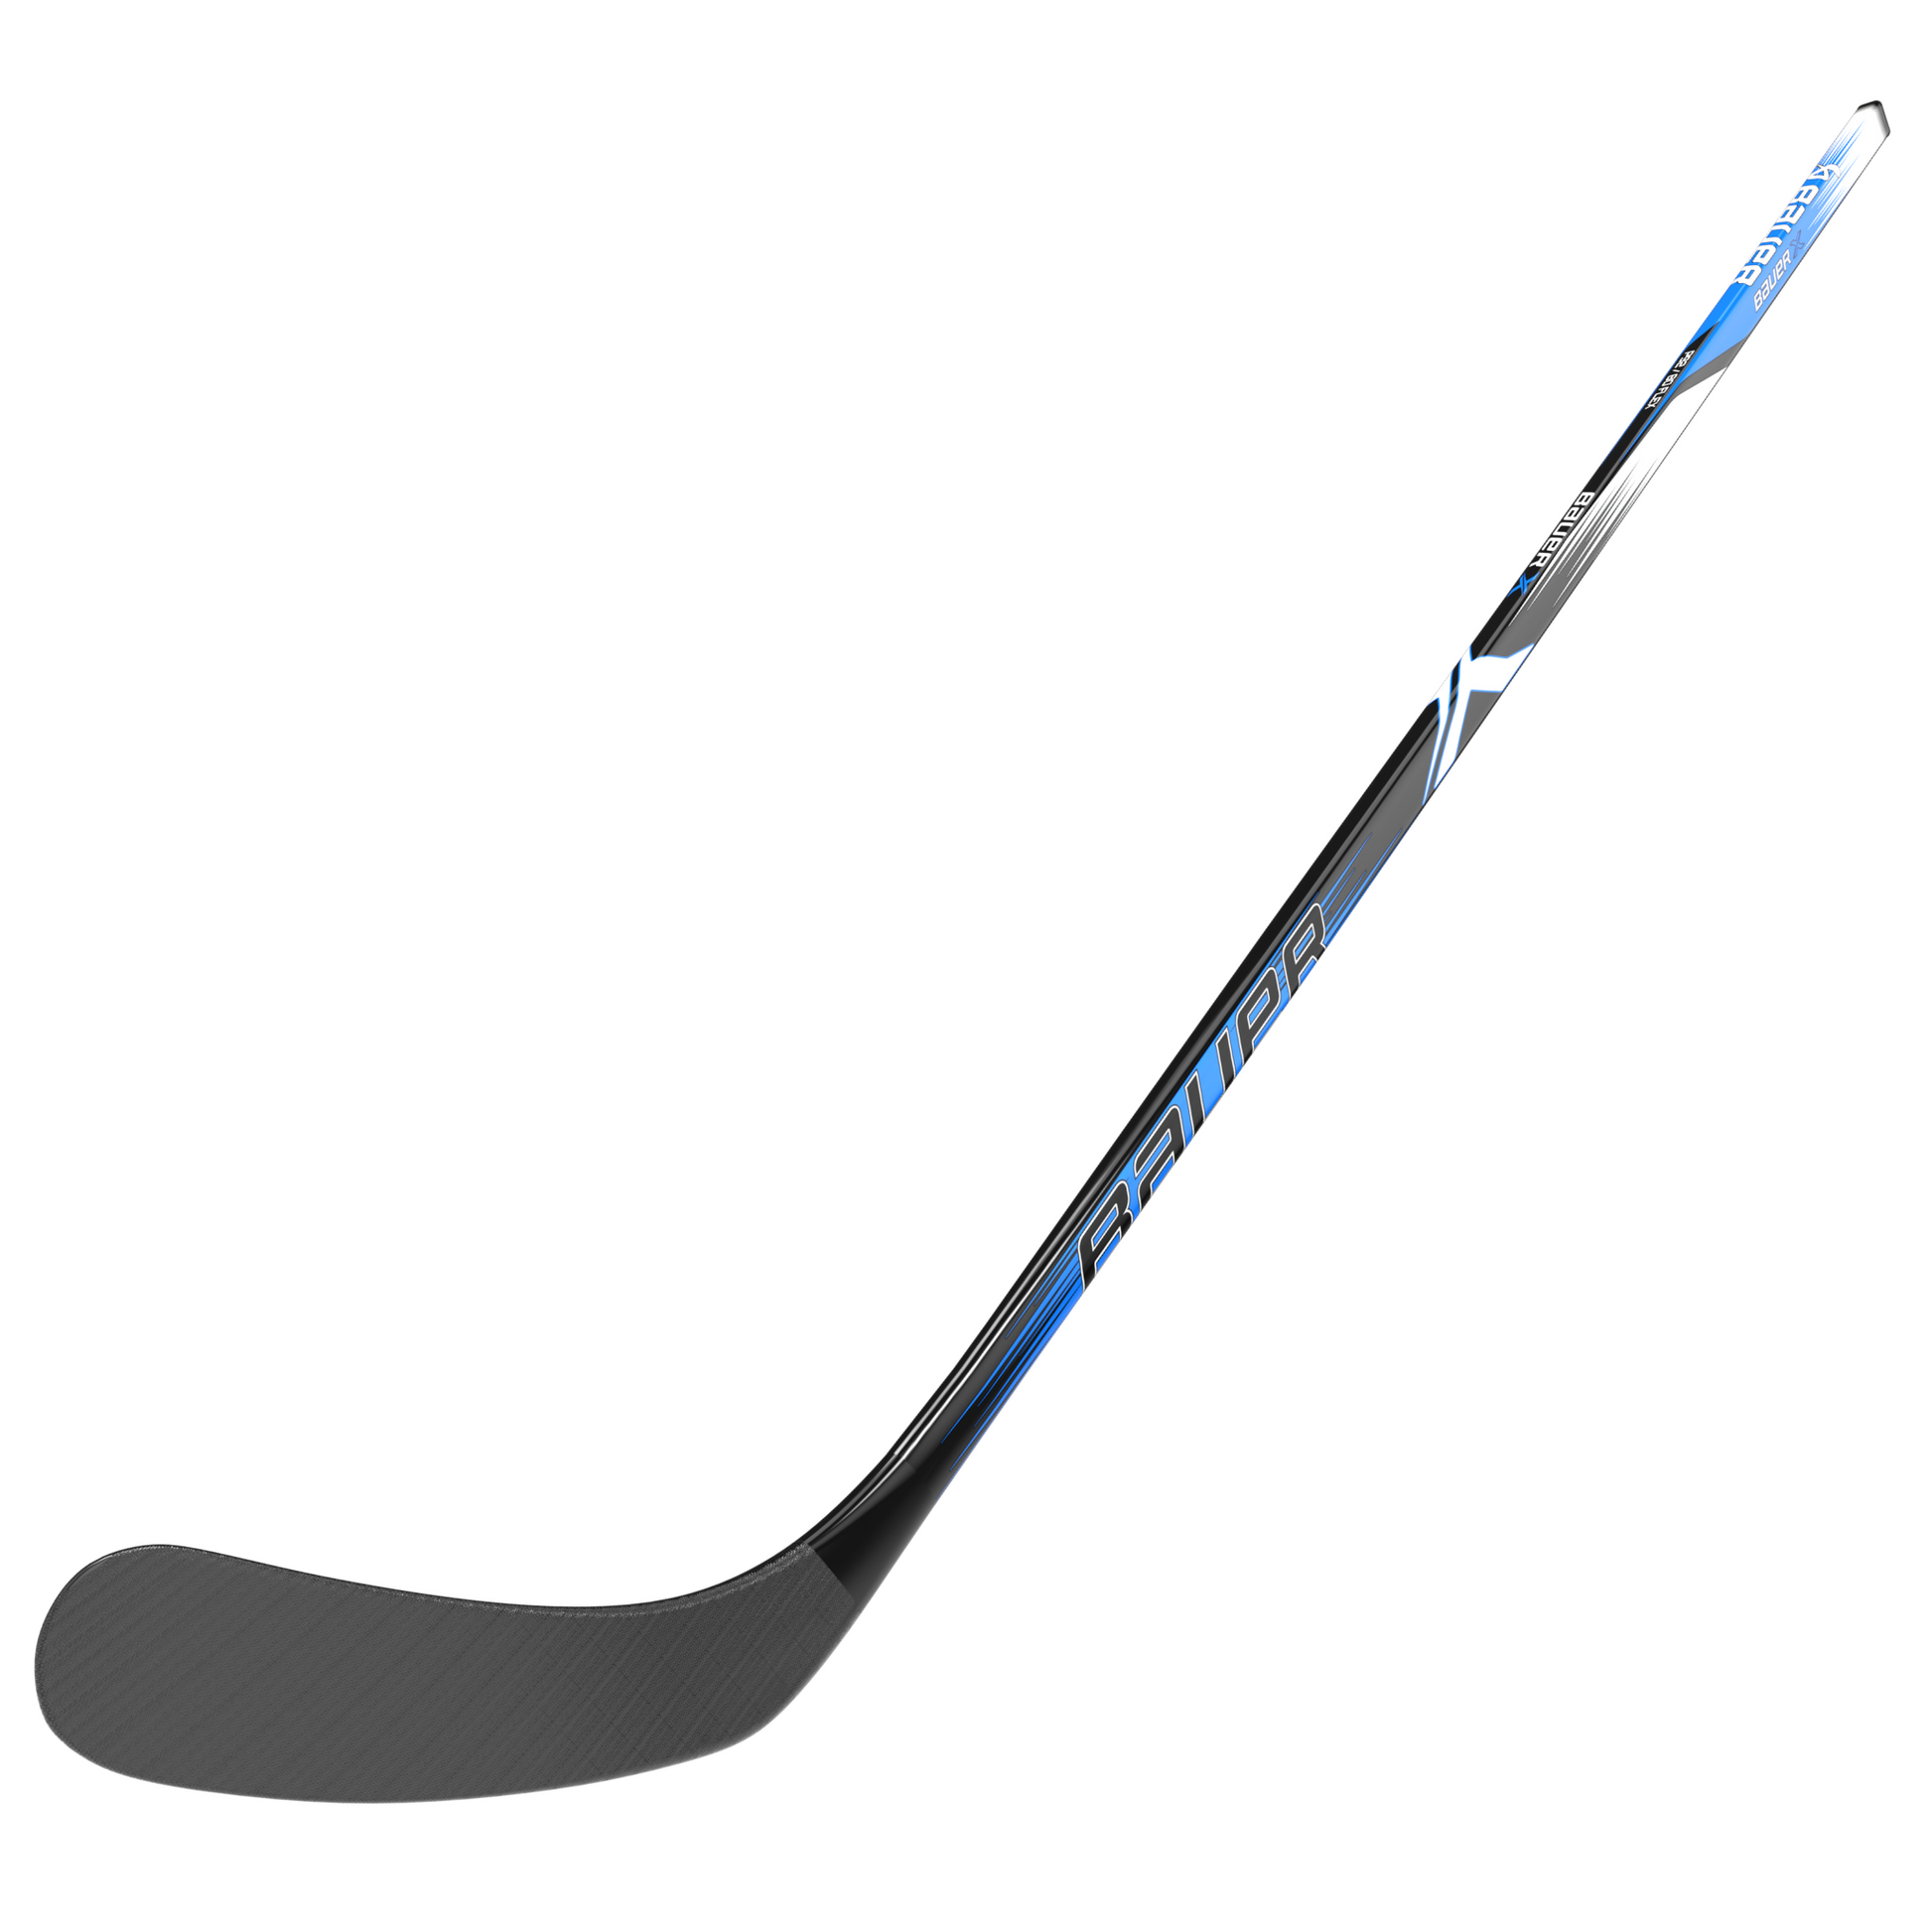 A photo of the Bauer X Series Intermediate Hockey Stick in colour black and blue, blade view.